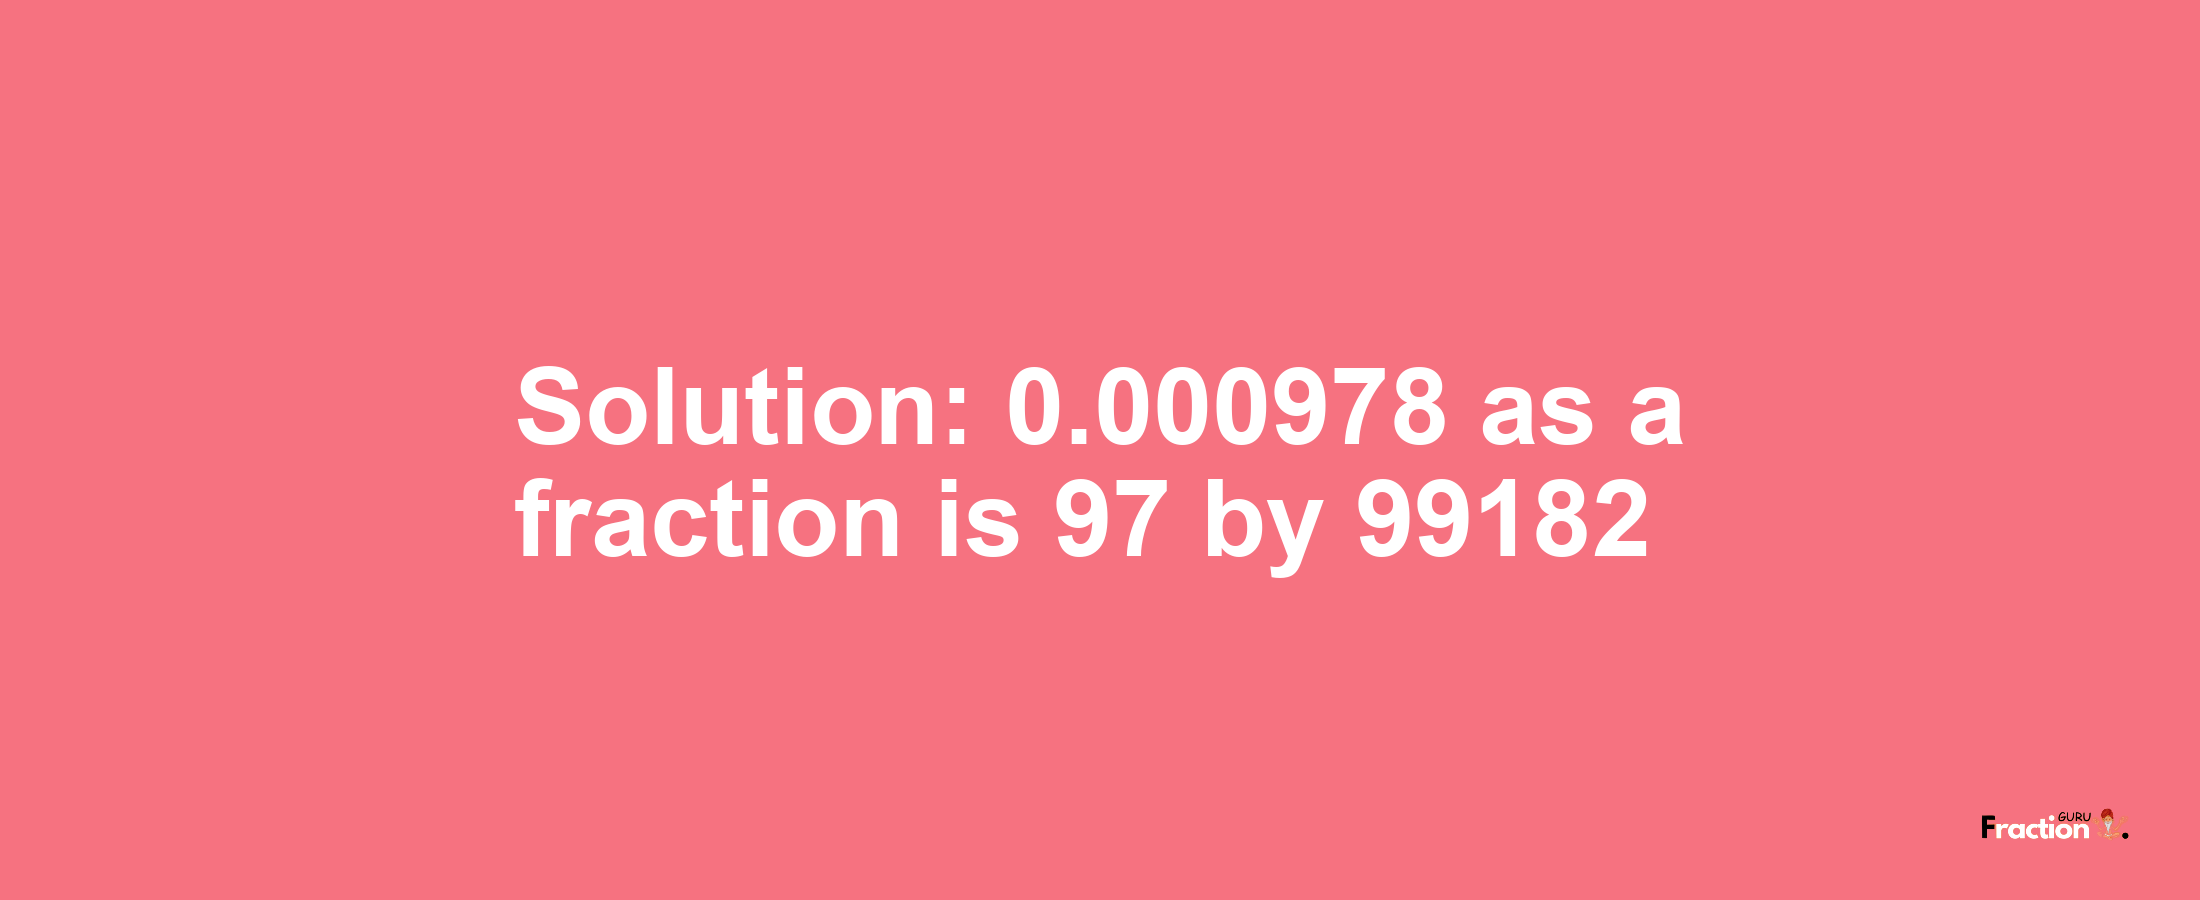 Solution:0.000978 as a fraction is 97/99182